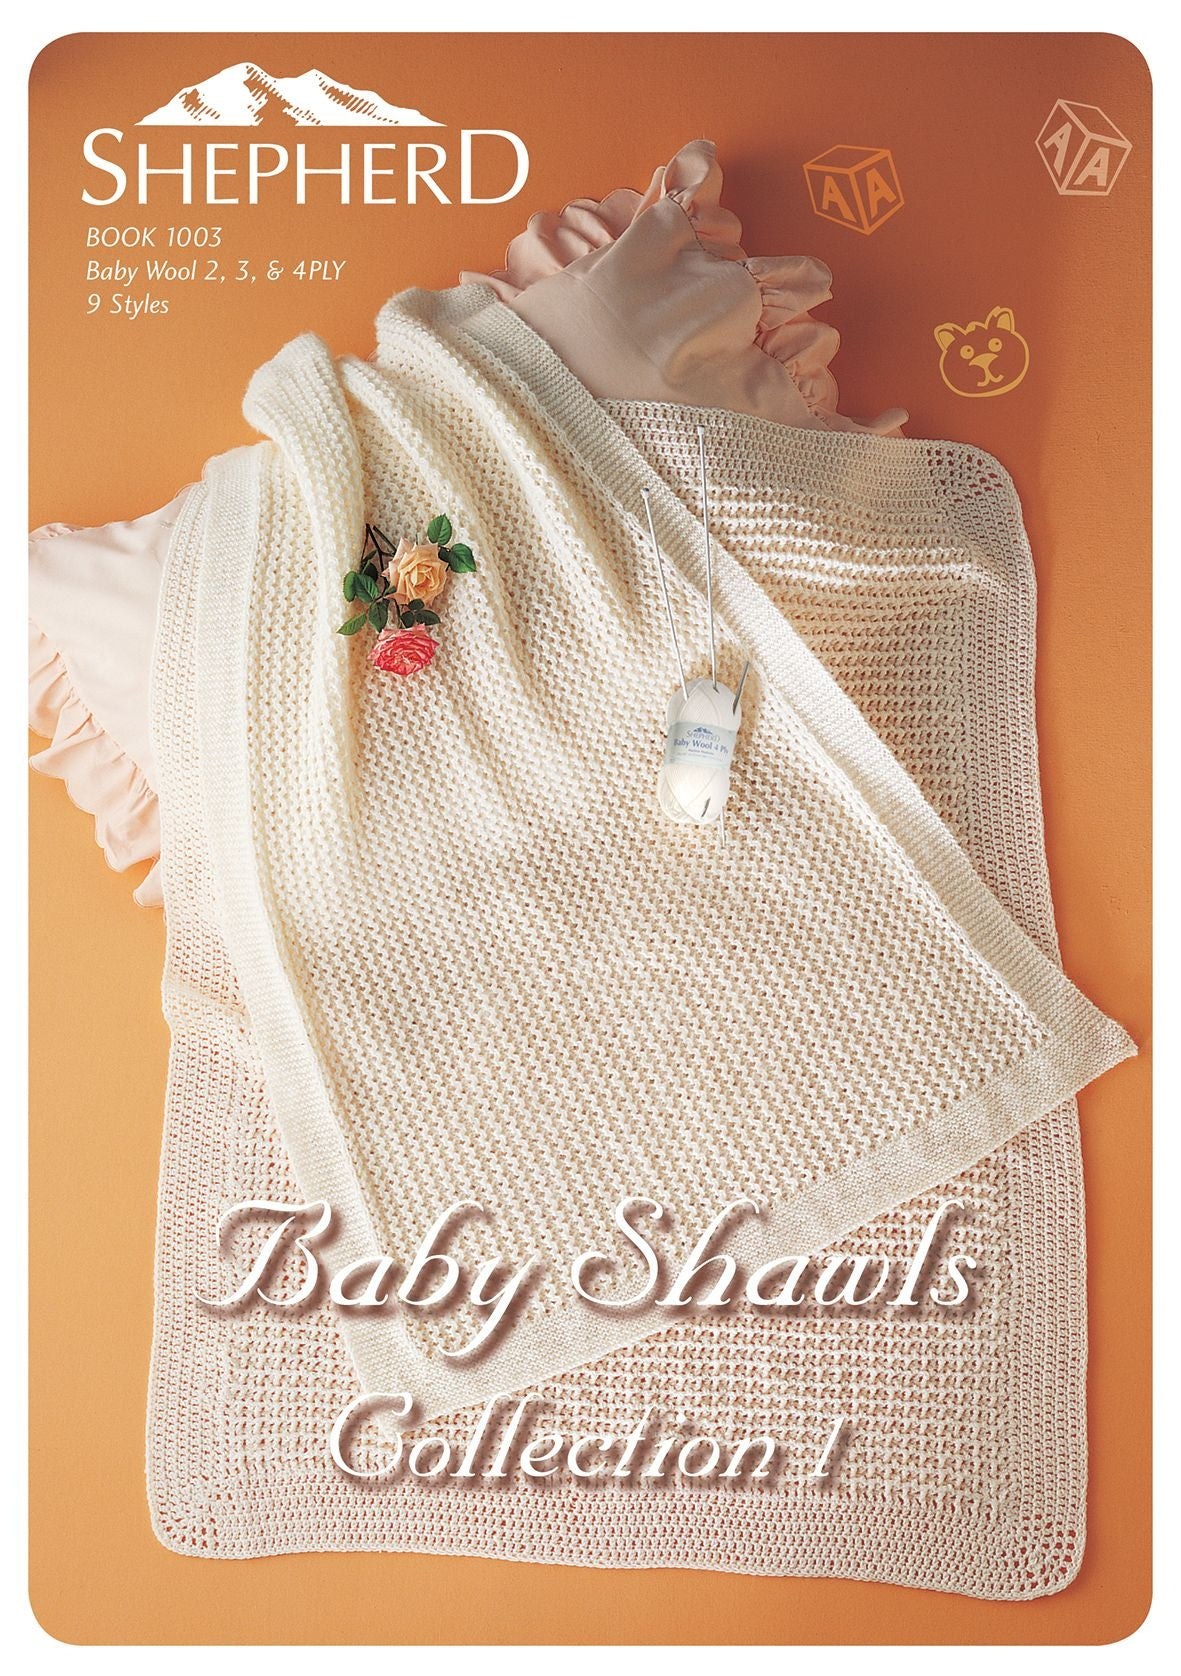 Baby Shawls Collection 1 - Shepherd Book 1003